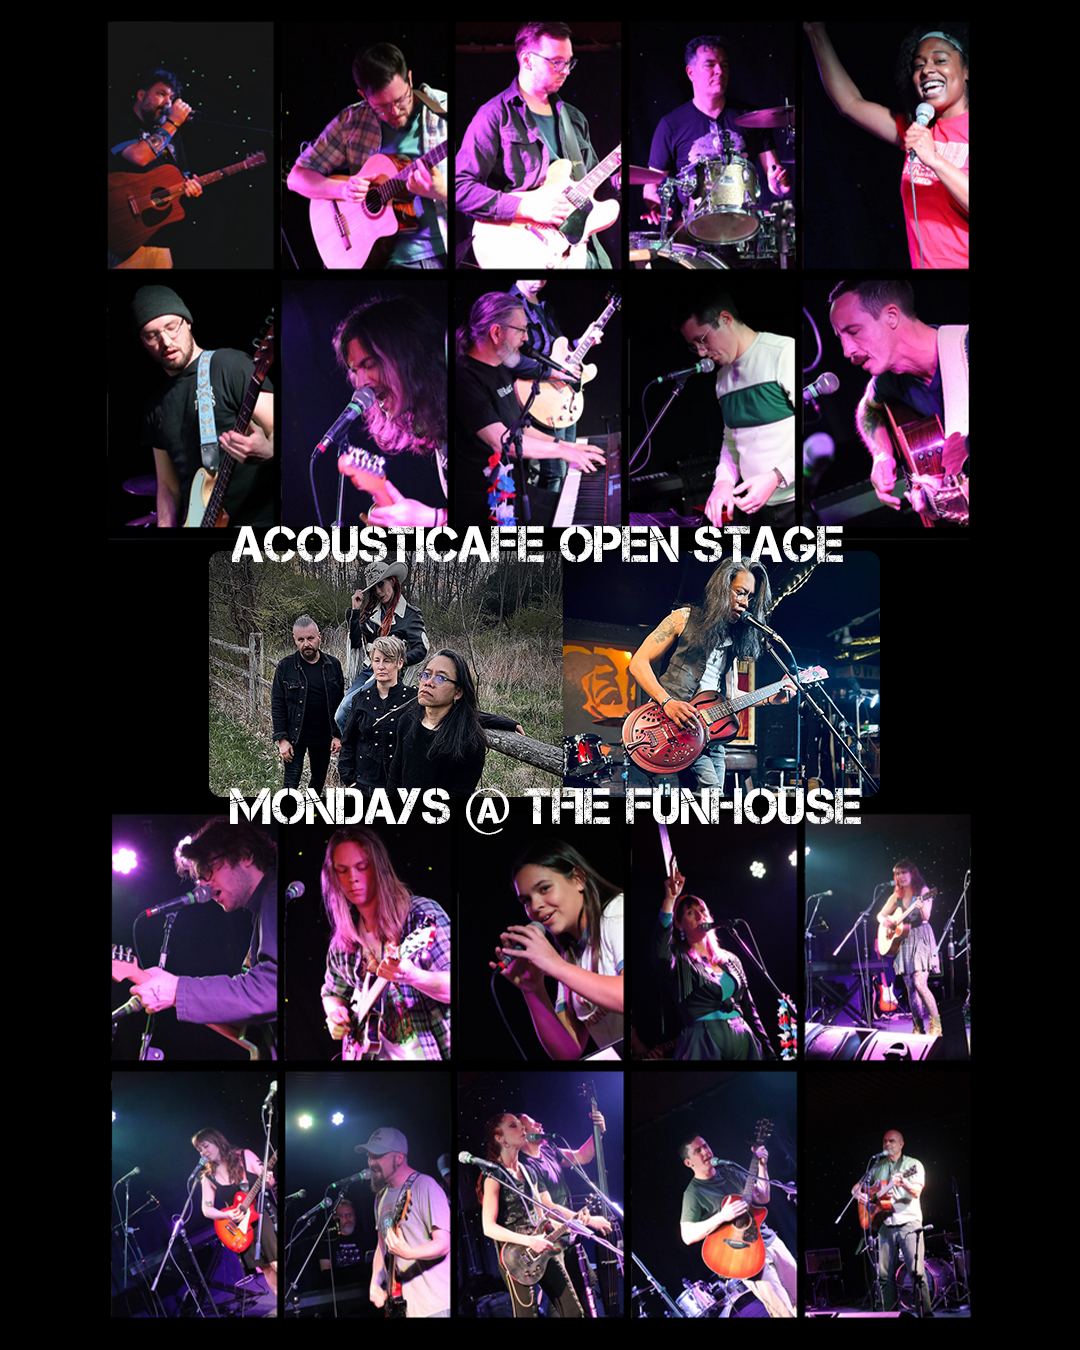 AcoustiCafe Open Stage every Monday at The Funhouse at Mr Smalls!